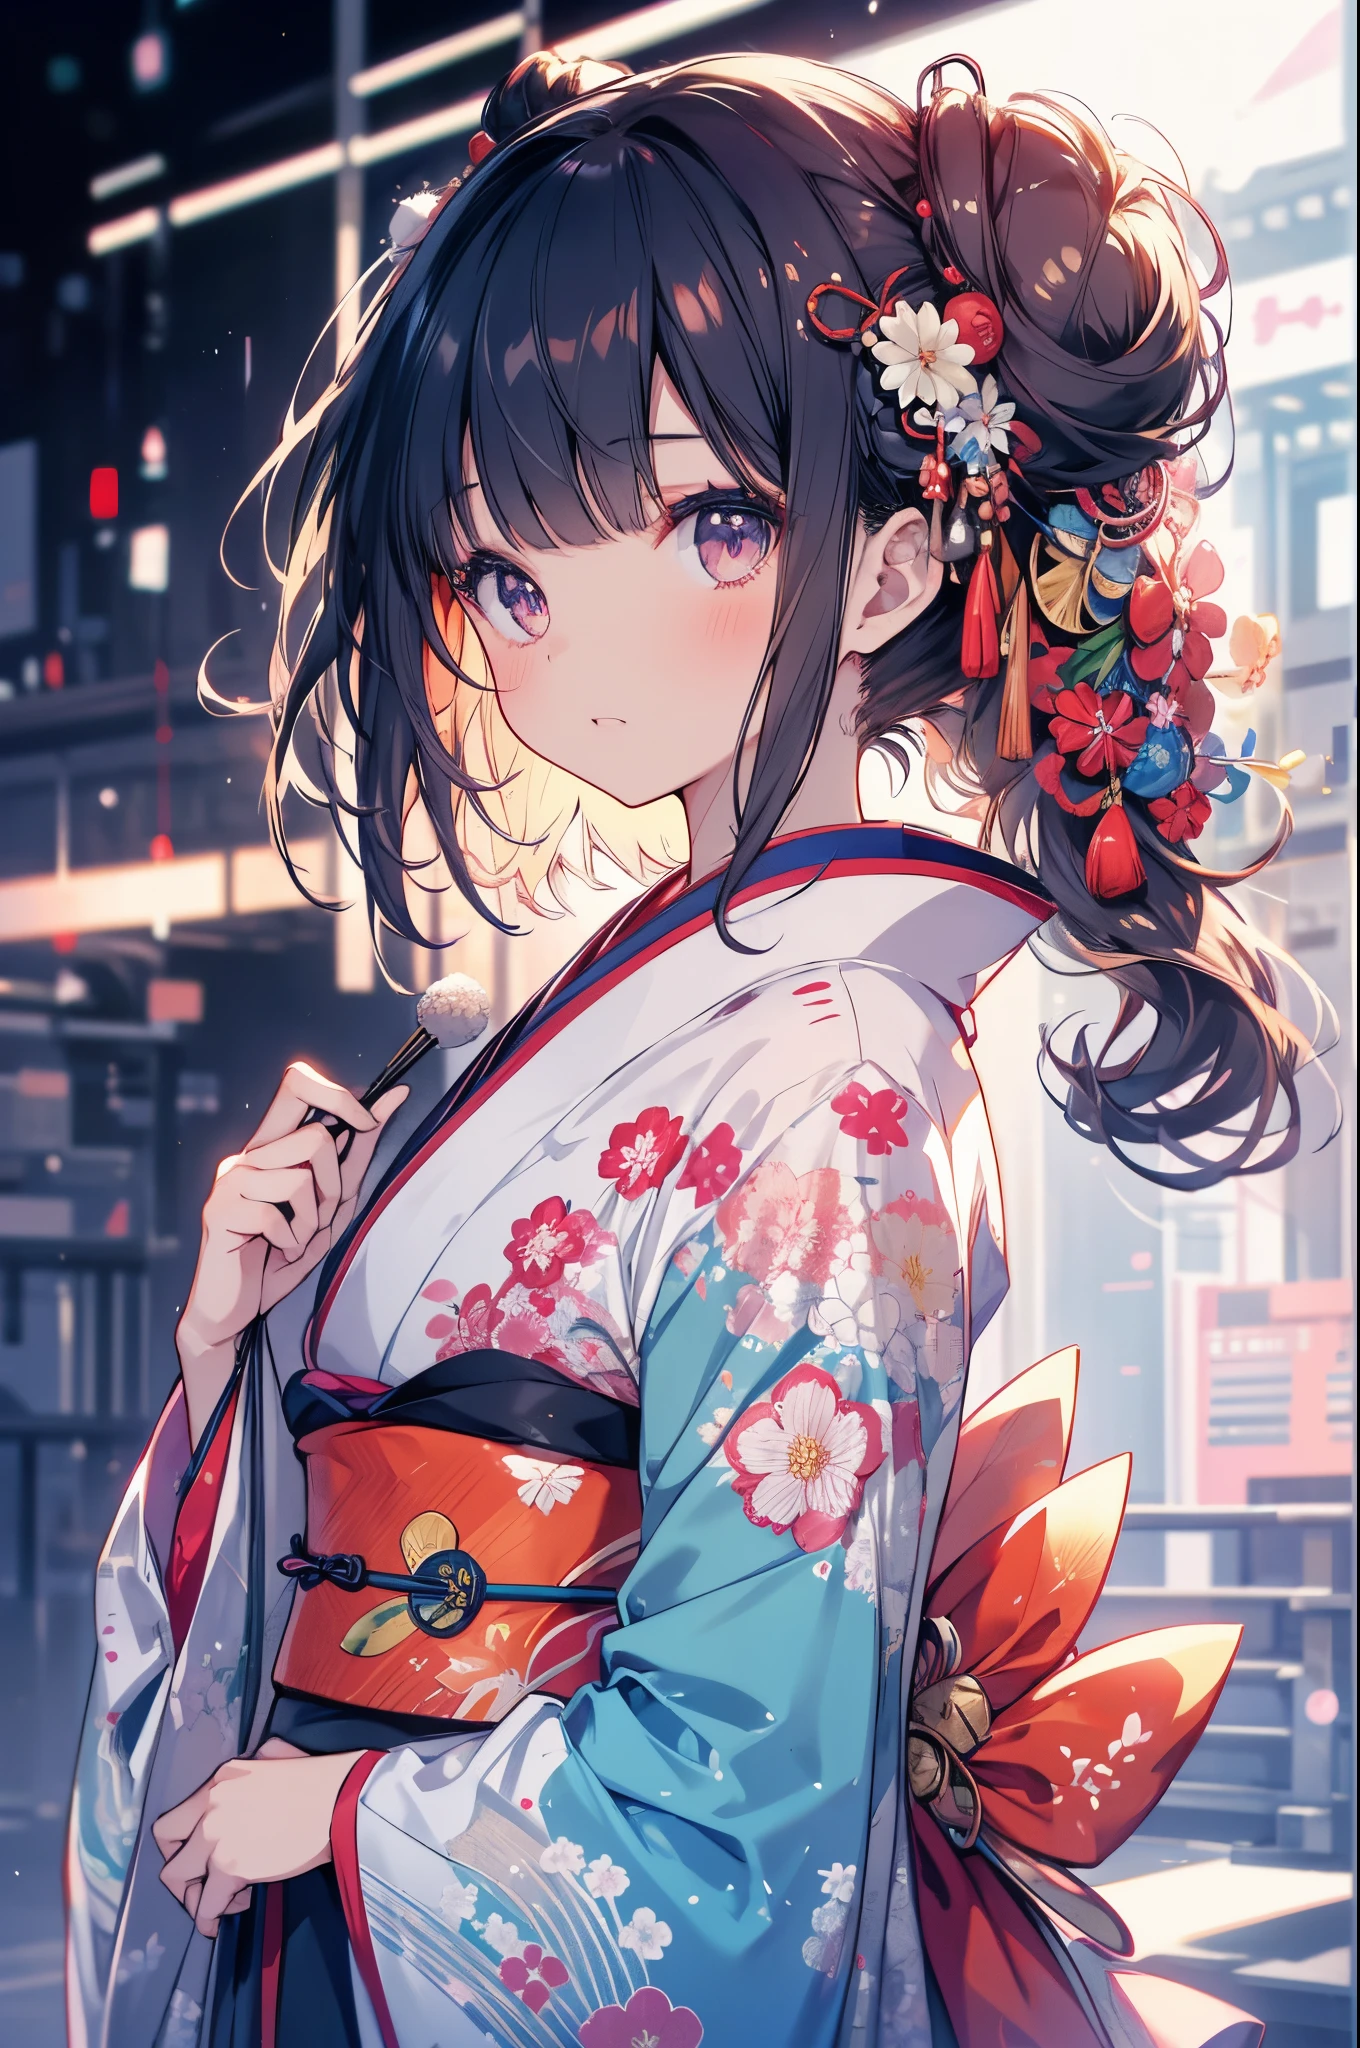 1 girl in, jpn, kimono, Have a fan, Bun, Beautiful fece, delicate, kawaii, A dark-haired, Slender eyes, ((head to waist)), Masterpiece, top-quality, An ultra-high picture quality